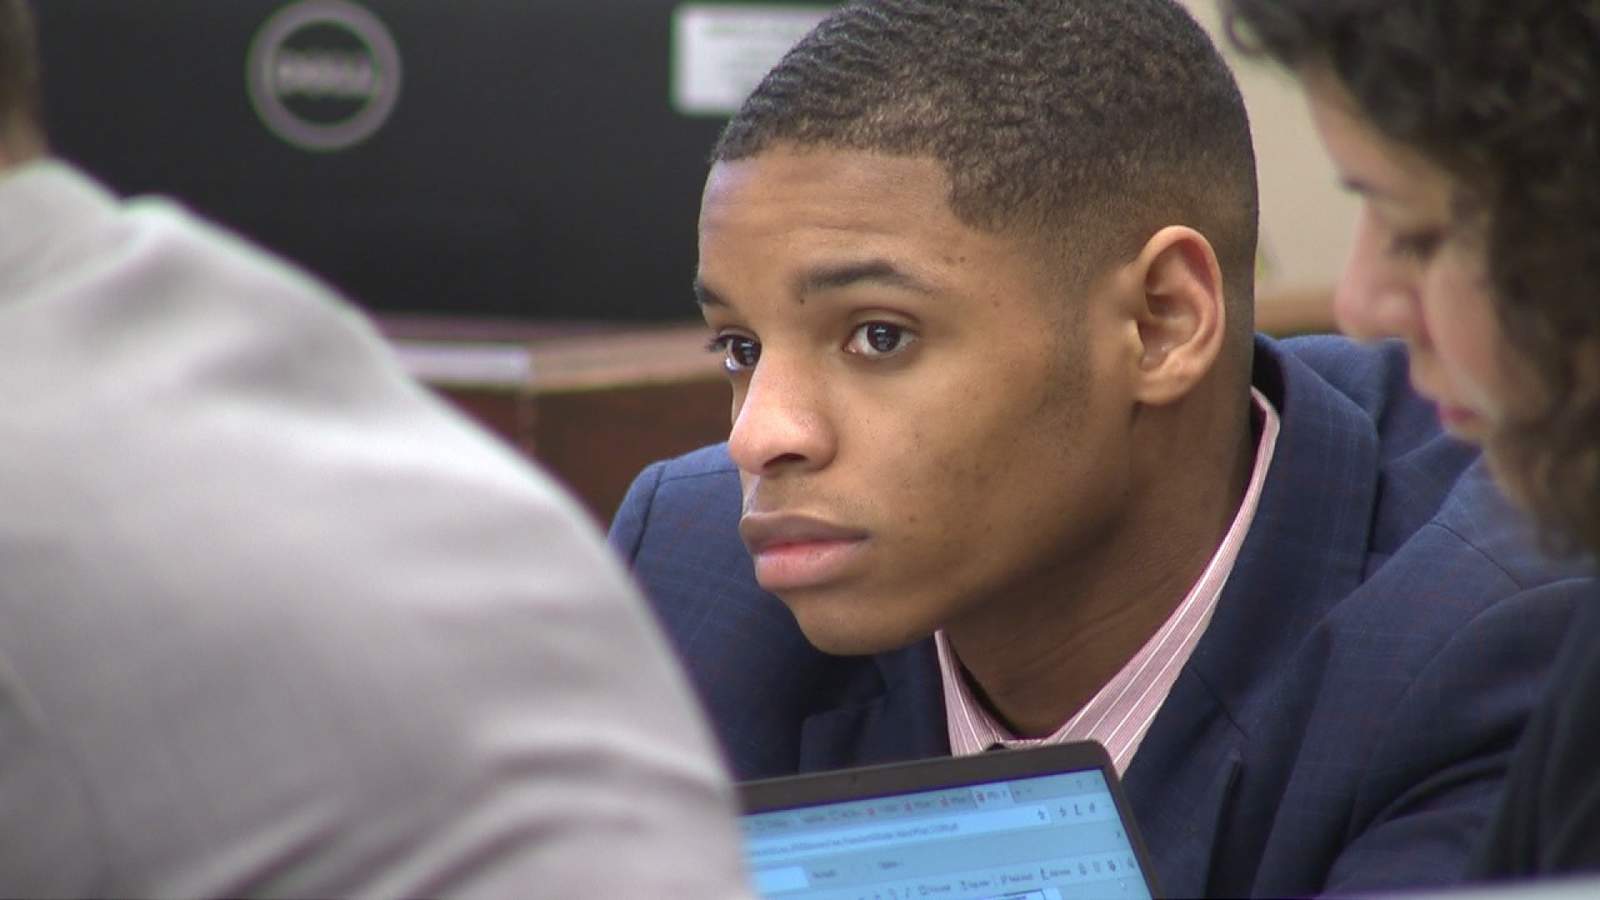 Jury hears emotional account from victim of alleged ‘Medical Center rapist’